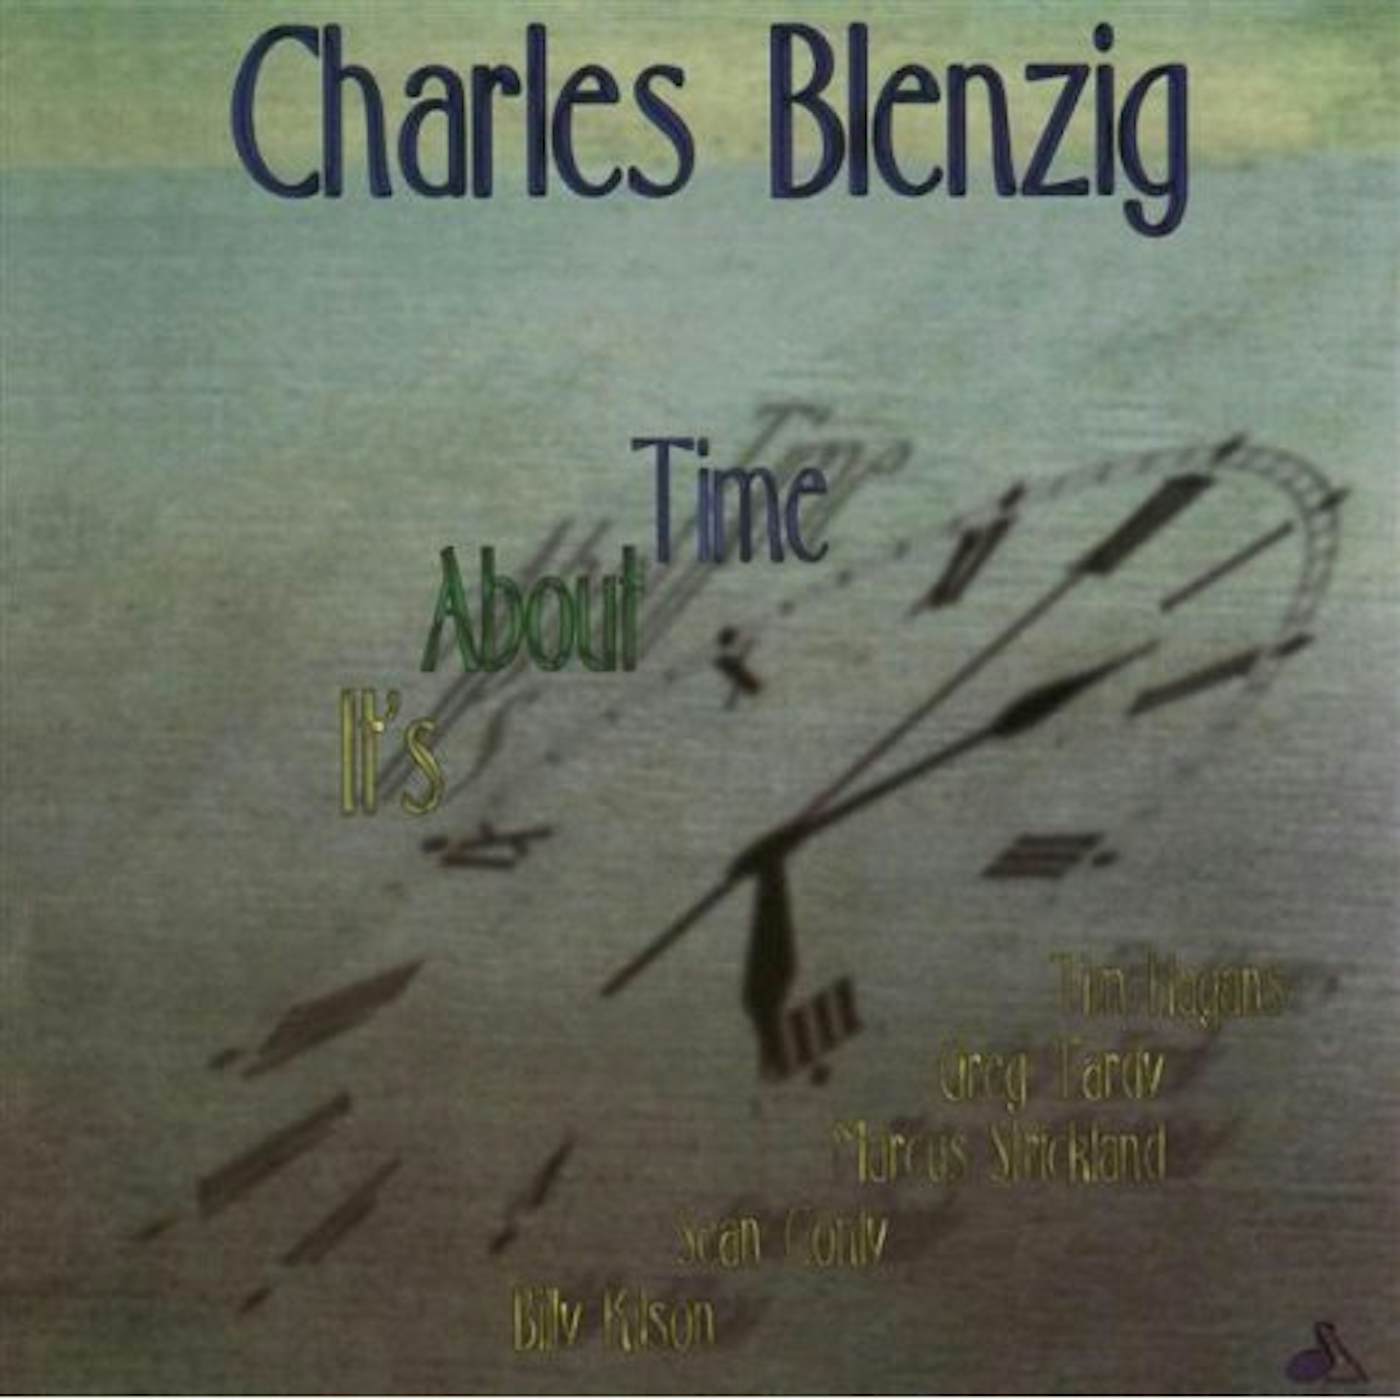 Charles Blenzig IT'S ABOUT TIME CD